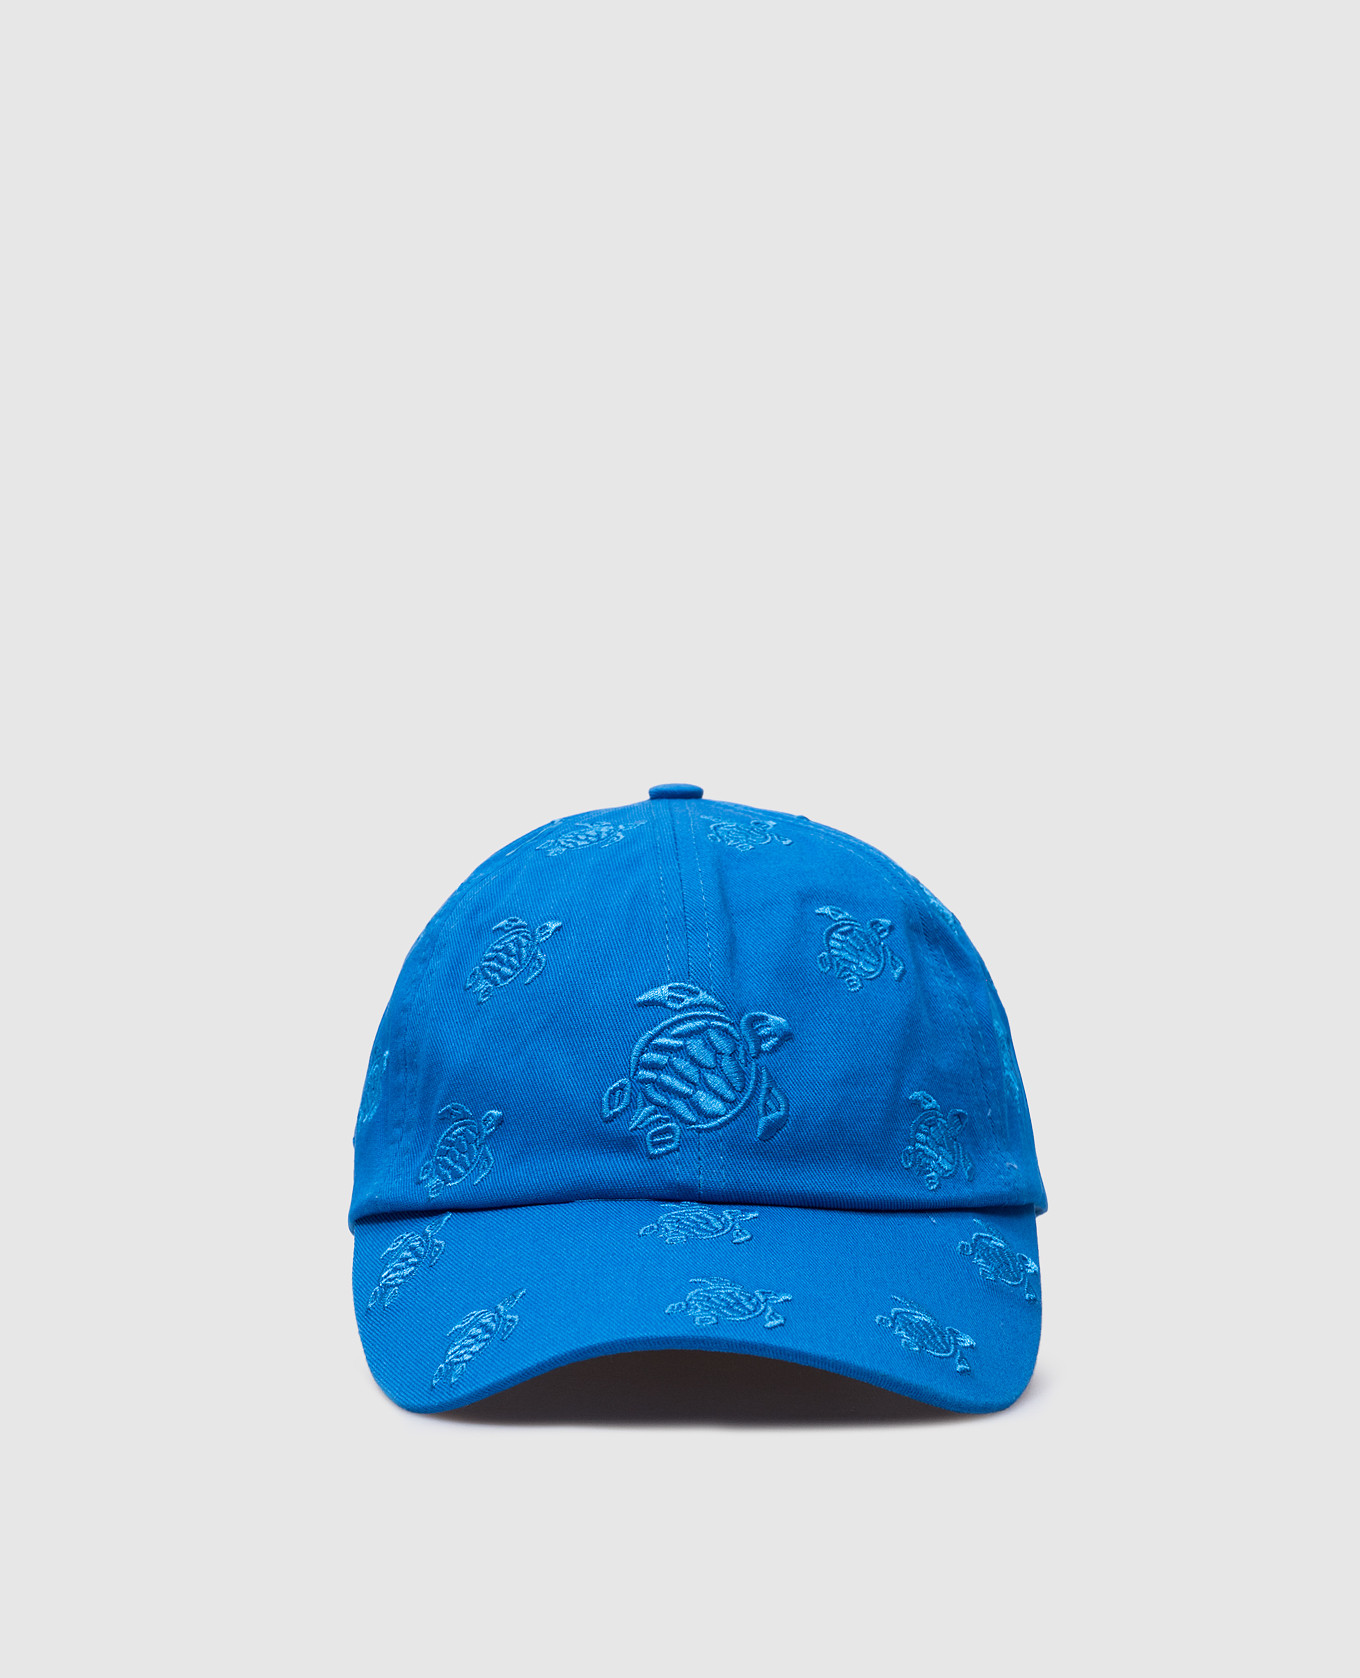 Turtles All Over Cap in blue with logo embroidery